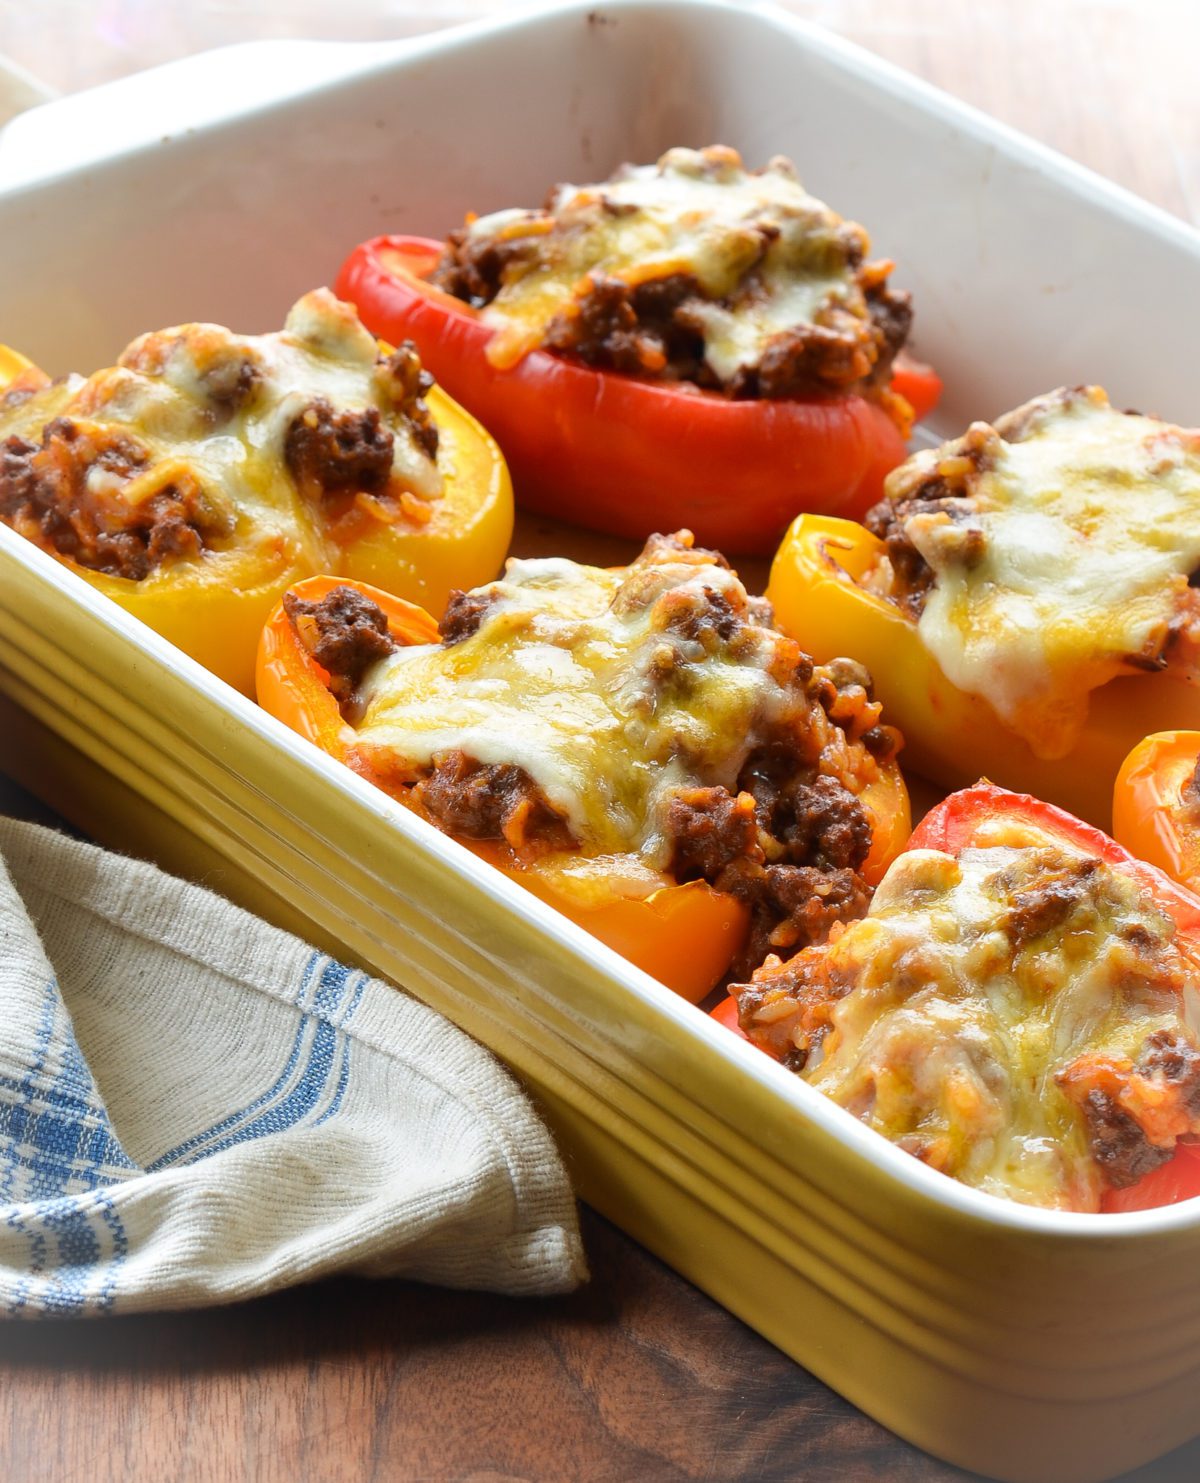 How to Make Stuffed Peppers, Stuffed Peppers Recipe